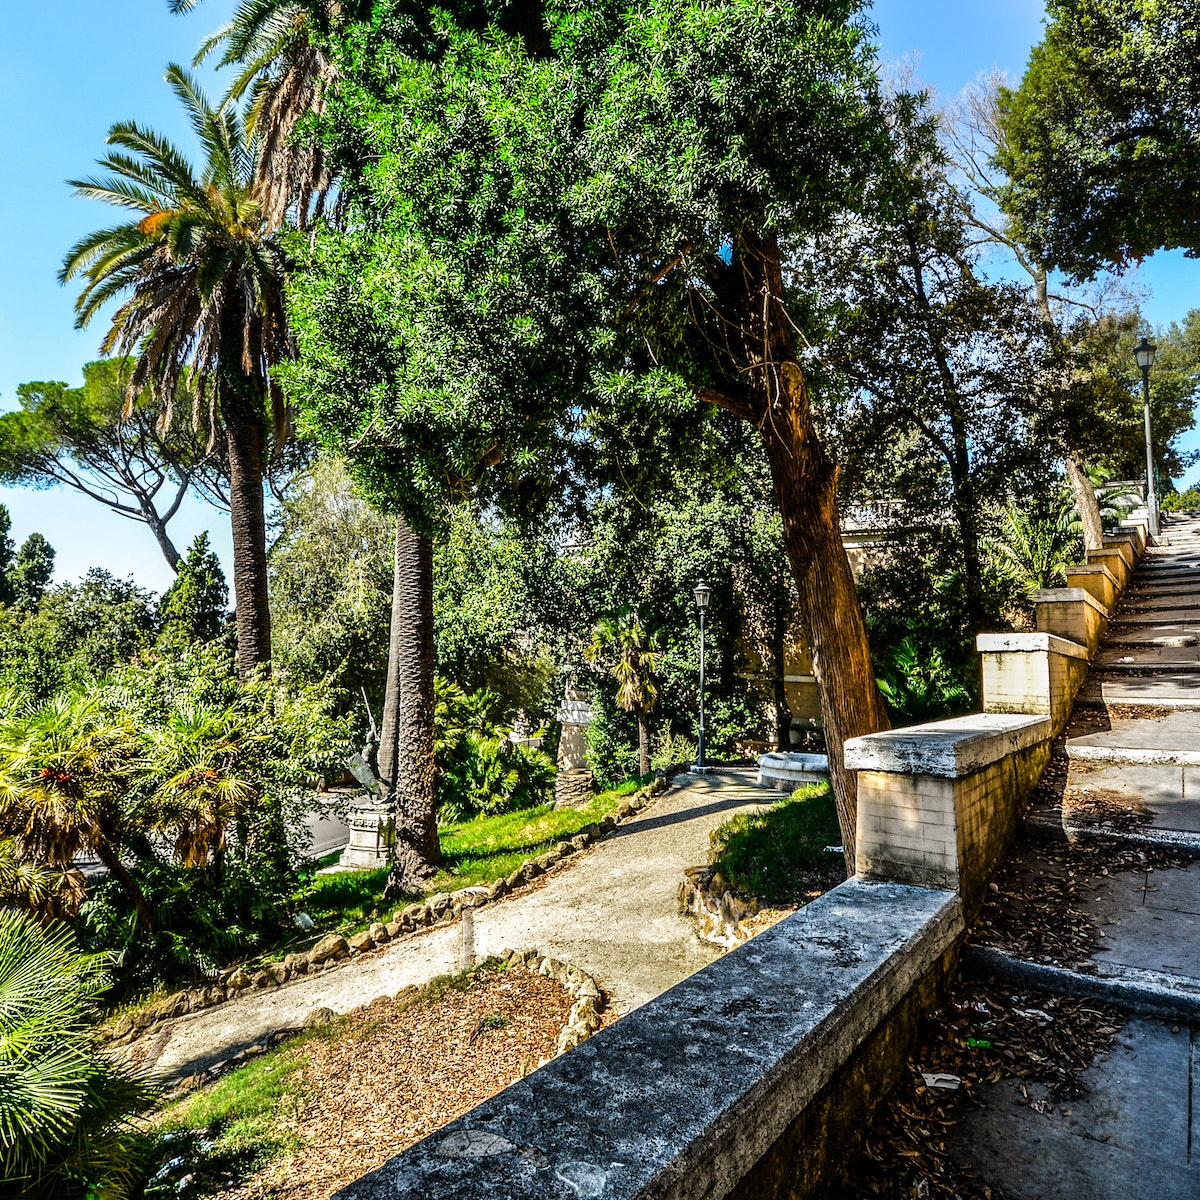 The path from the Piazza del Popolo to the Village Borghese and Borghese Gardens on the Pincian hill.
1135690511
background, beautiful, borghese, day, environment, forest, garden, gardens, green, hill, italian, italy, landscape, lush, natural, nature, outdoor, park, path, piazza del popolo, pincian, pincio, road, rome, rome italy, scenic, stairs, stone, summer, tourism, trail, travel, tree, trees, view, village, walk, way